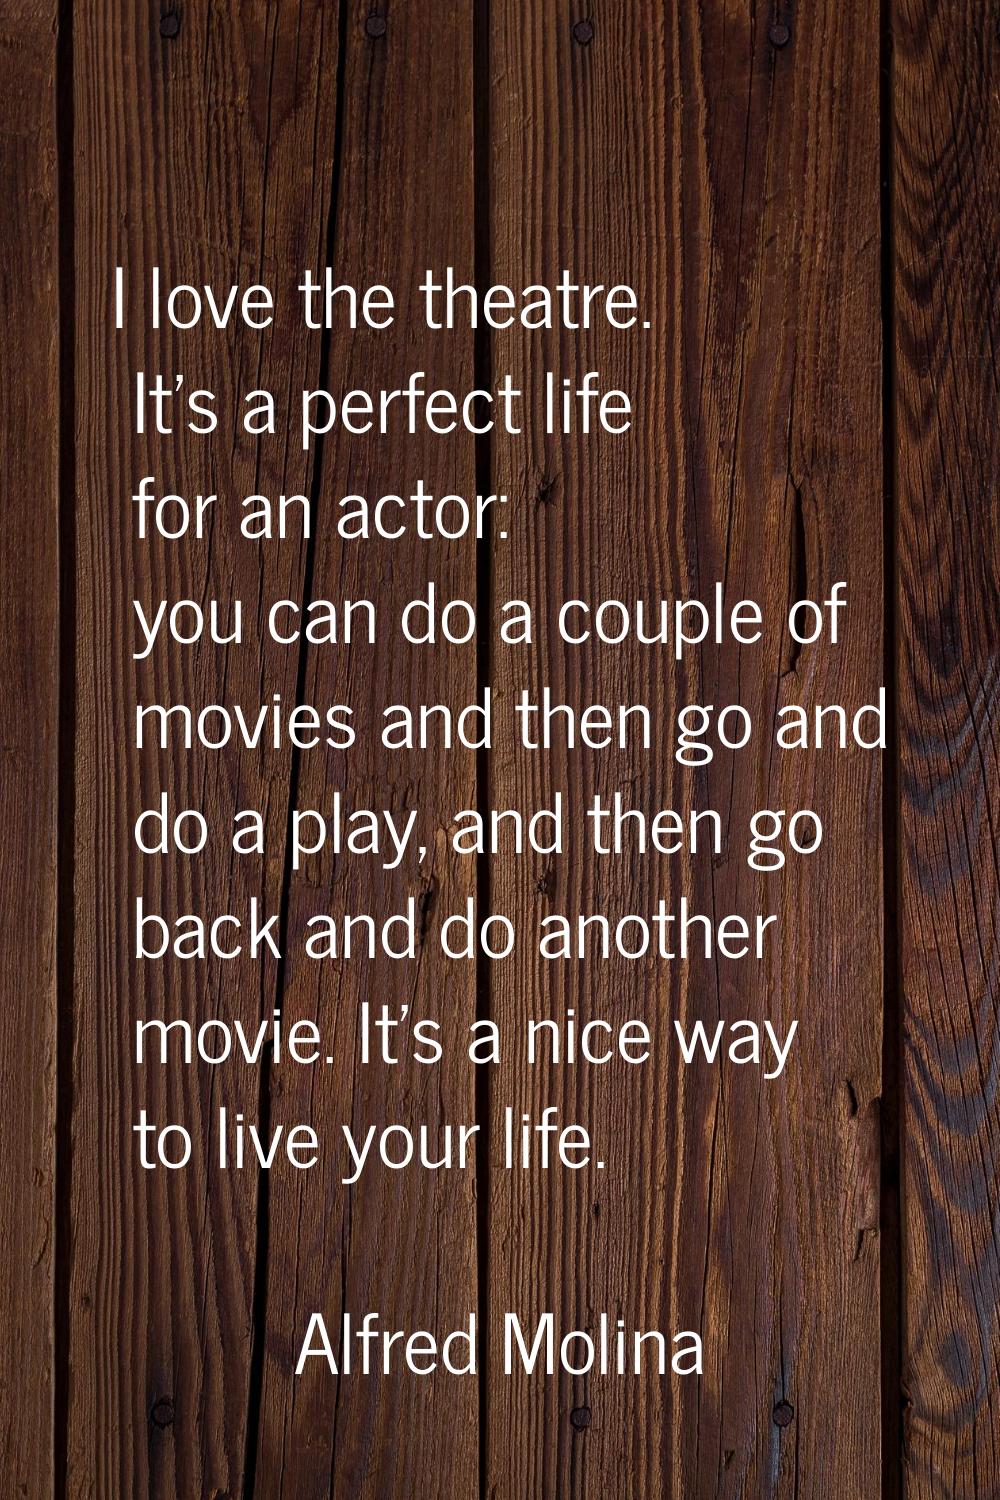 I love the theatre. It's a perfect life for an actor: you can do a couple of movies and then go and